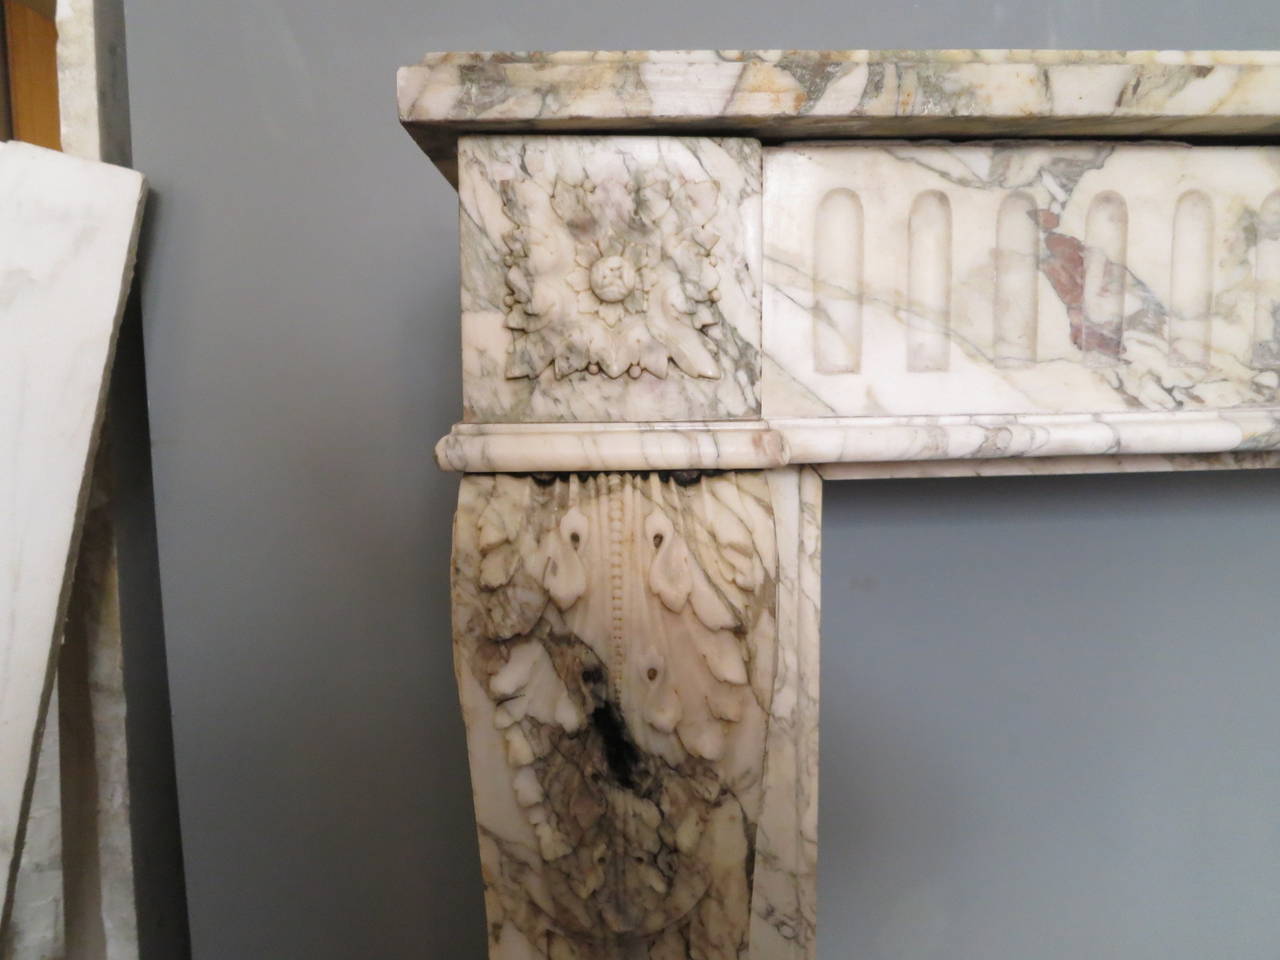 An early 19th century finely carved Louis XVI style fireplace in rare breche marble. The console jambs with tapering front panels and very well carved acanthus leaf with beading. The side returns paneled. The corner blocks of well carved square